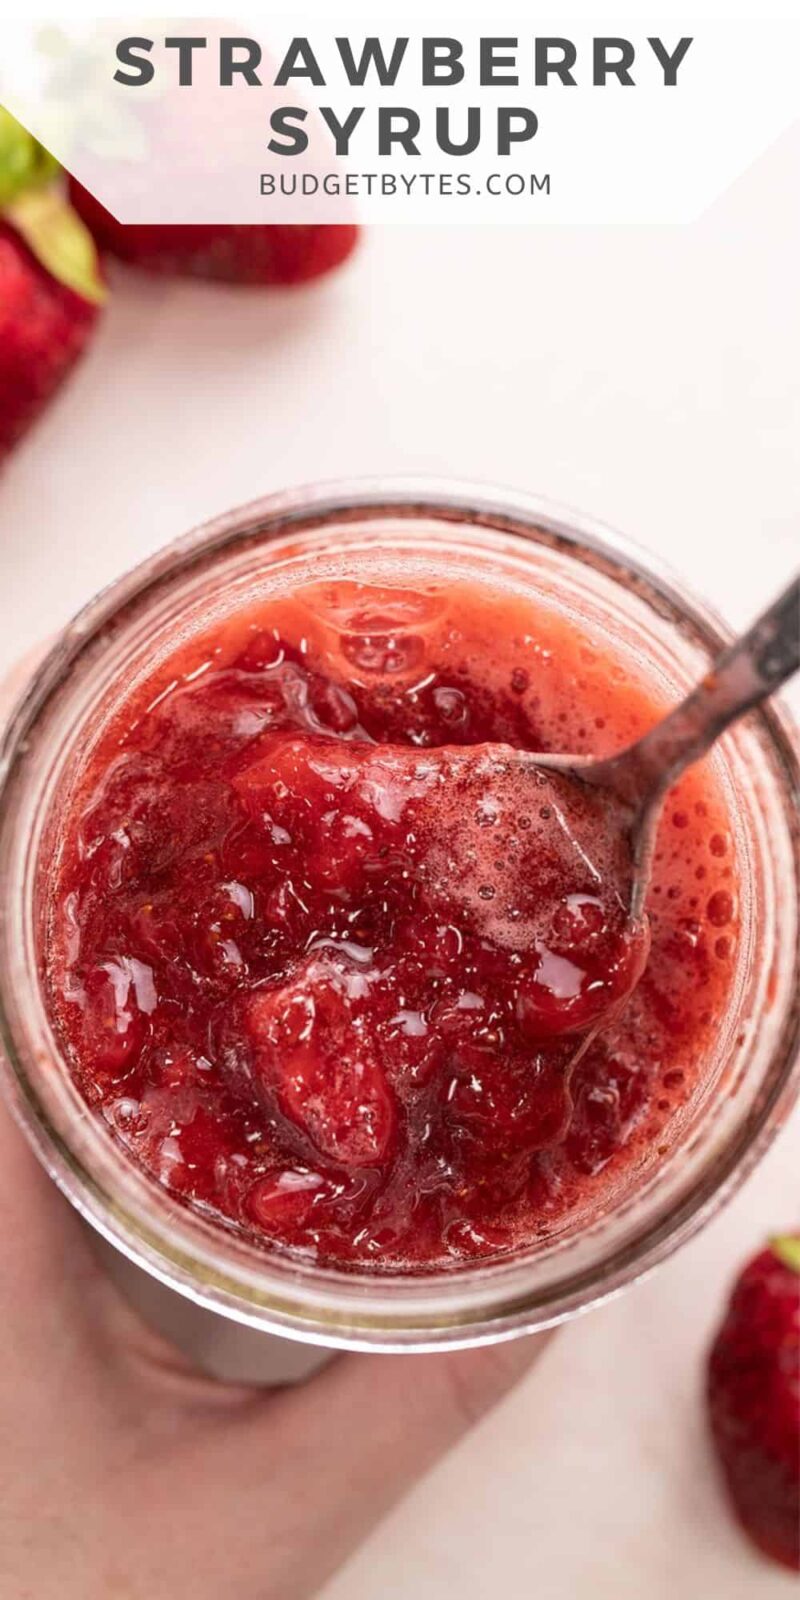 Overhead view of strawberry syrup in a jar with a spoon.